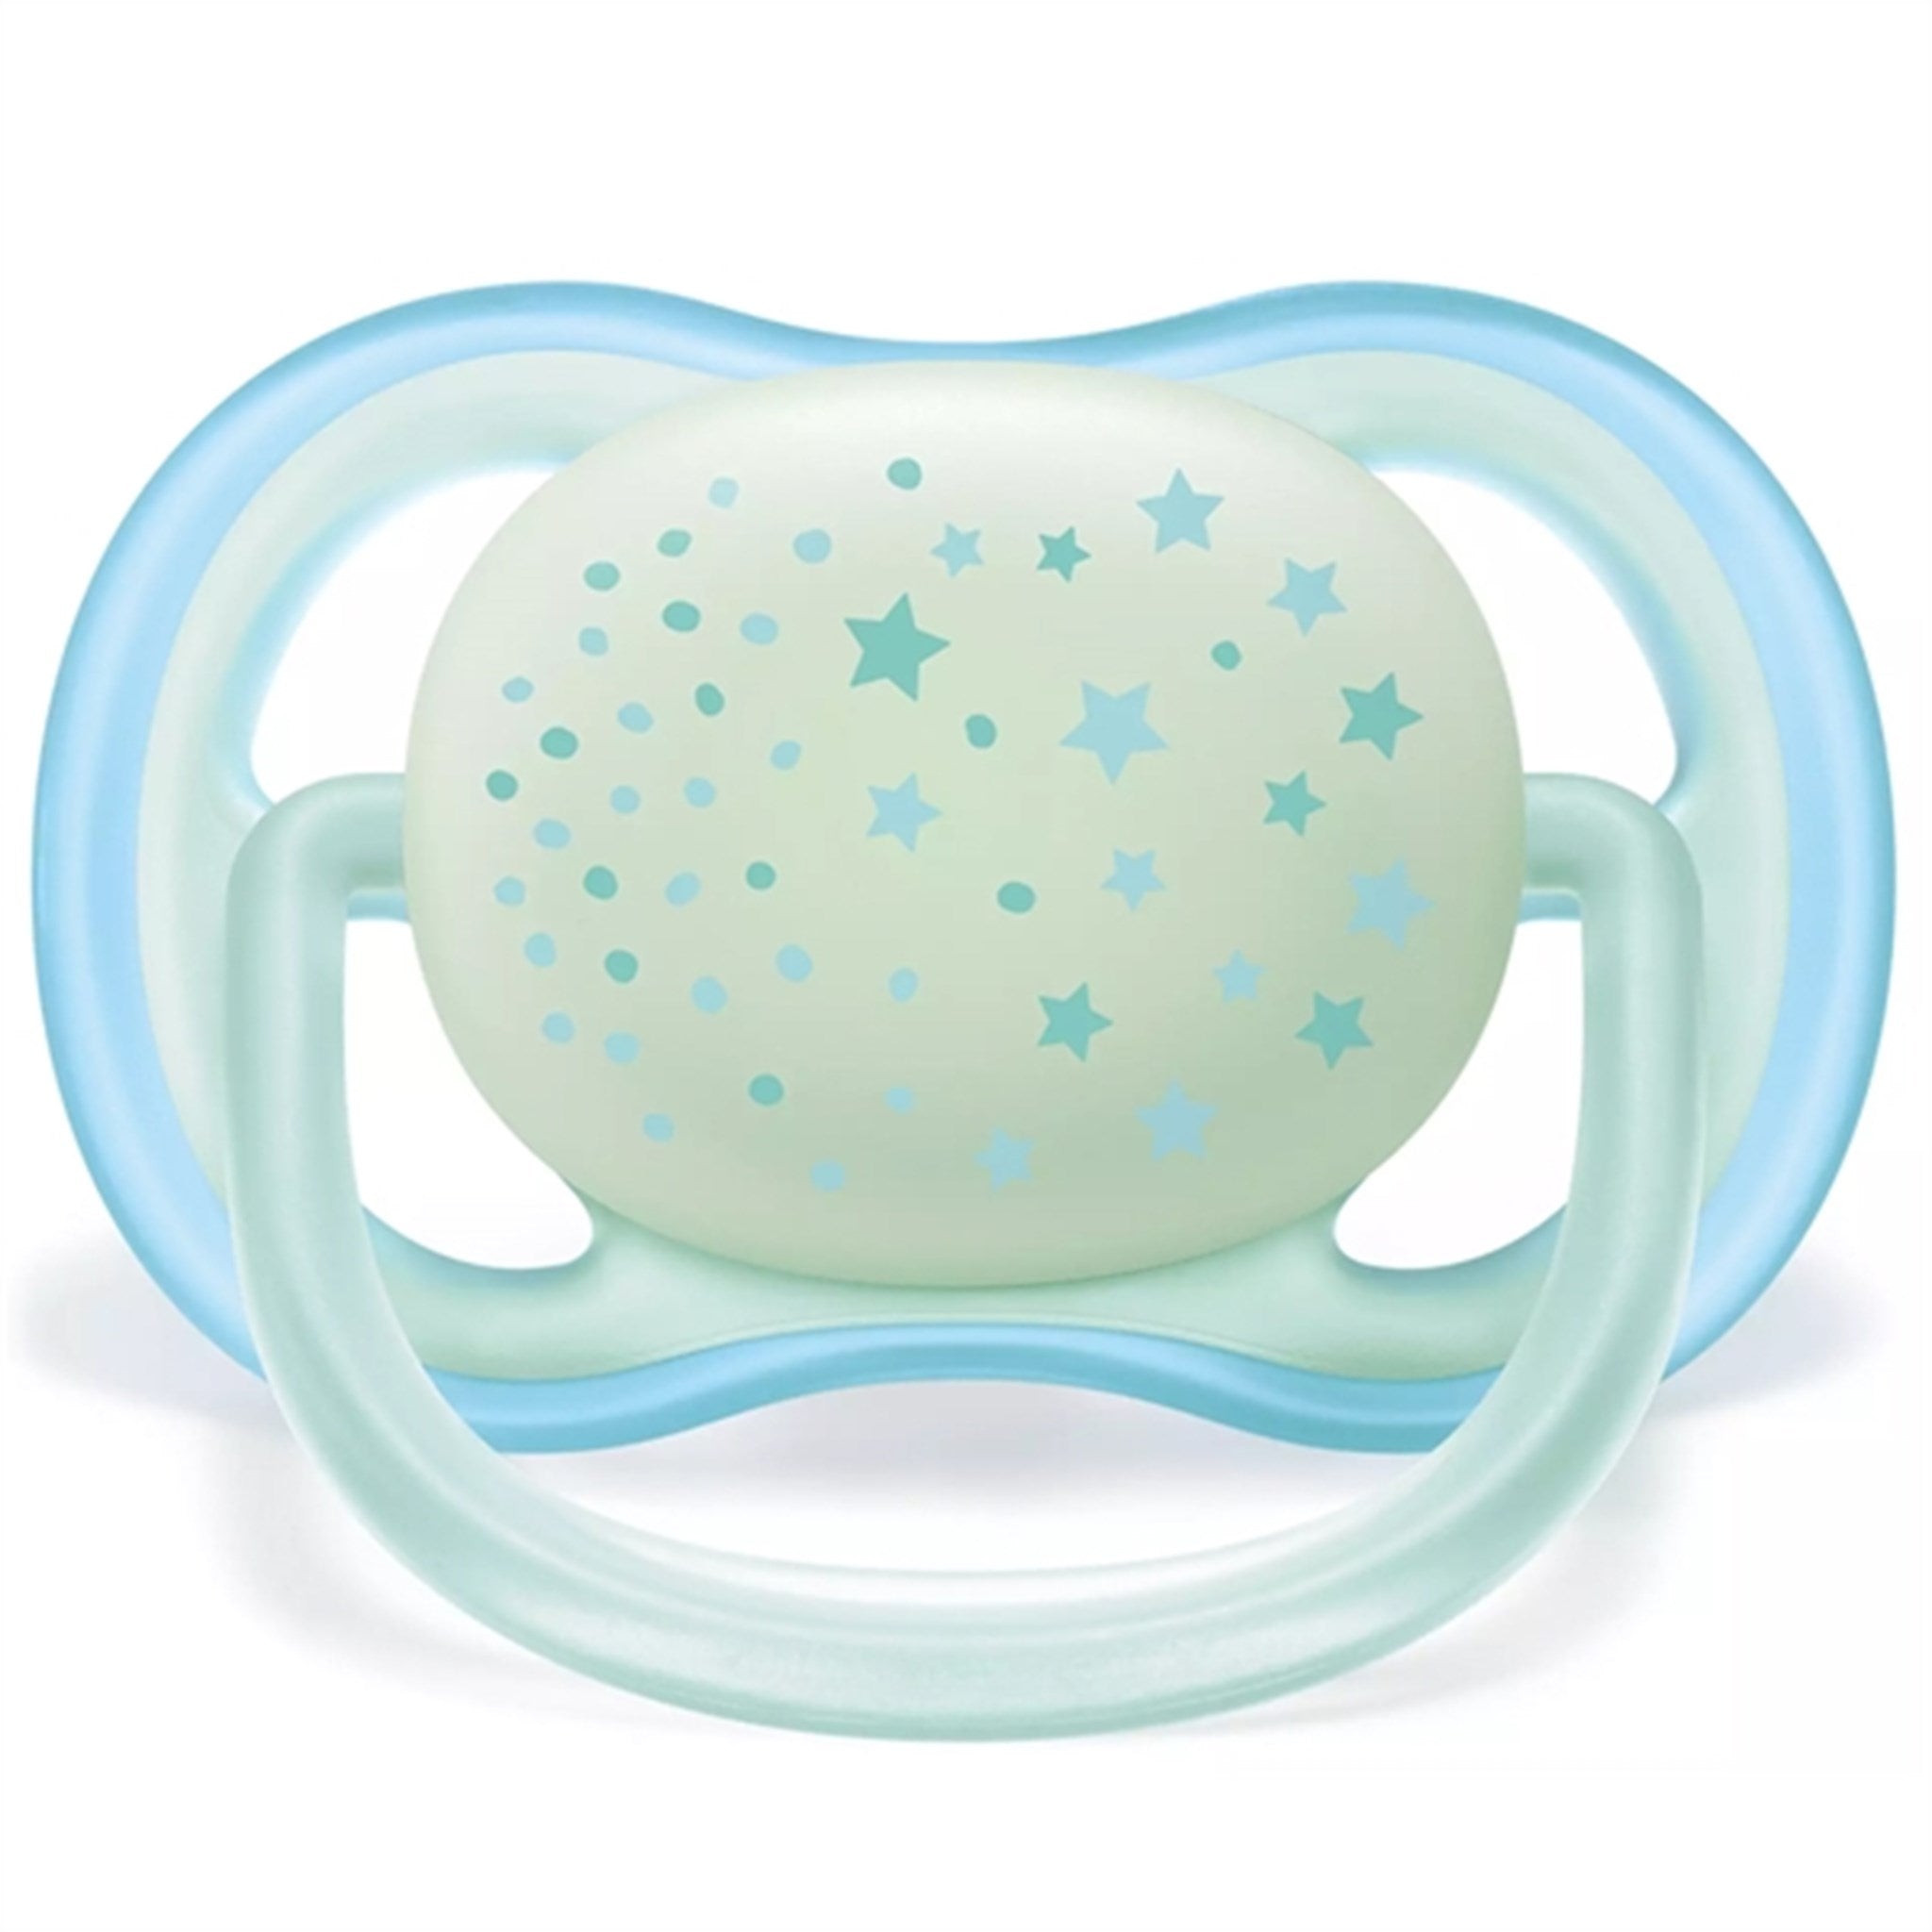 Philips Avent Ultra Air Sutter 0-6 mdr 2-pak 2